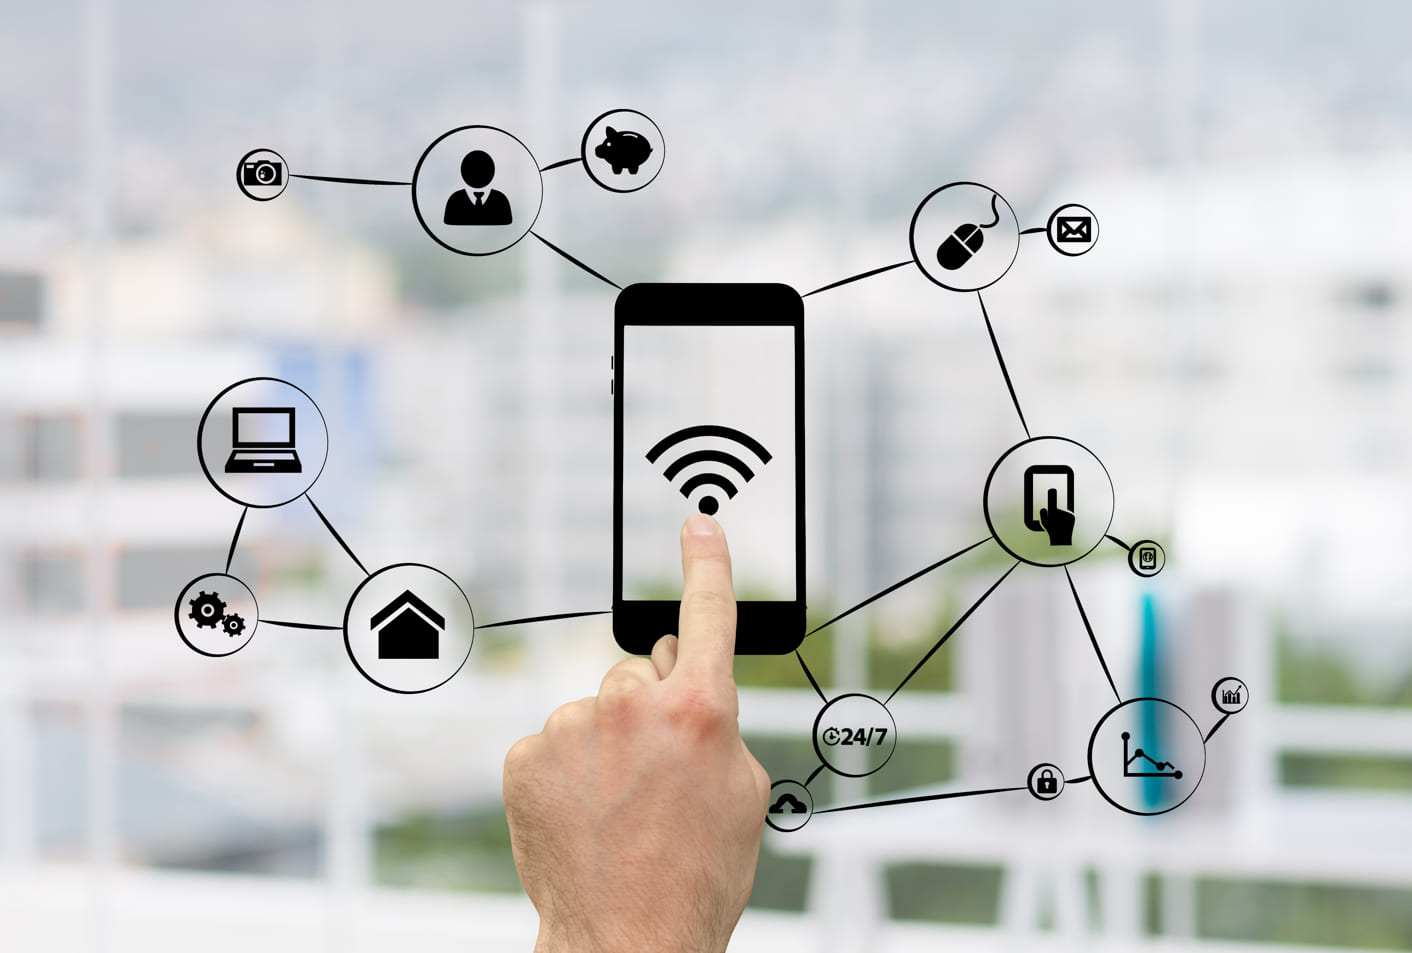 A finger touching a smartphone screen with a WiFi symbol, surrounded by icons representing various aspects of connectivity and smart technology, illustrating the concept of connected devices or the Internet of Things 